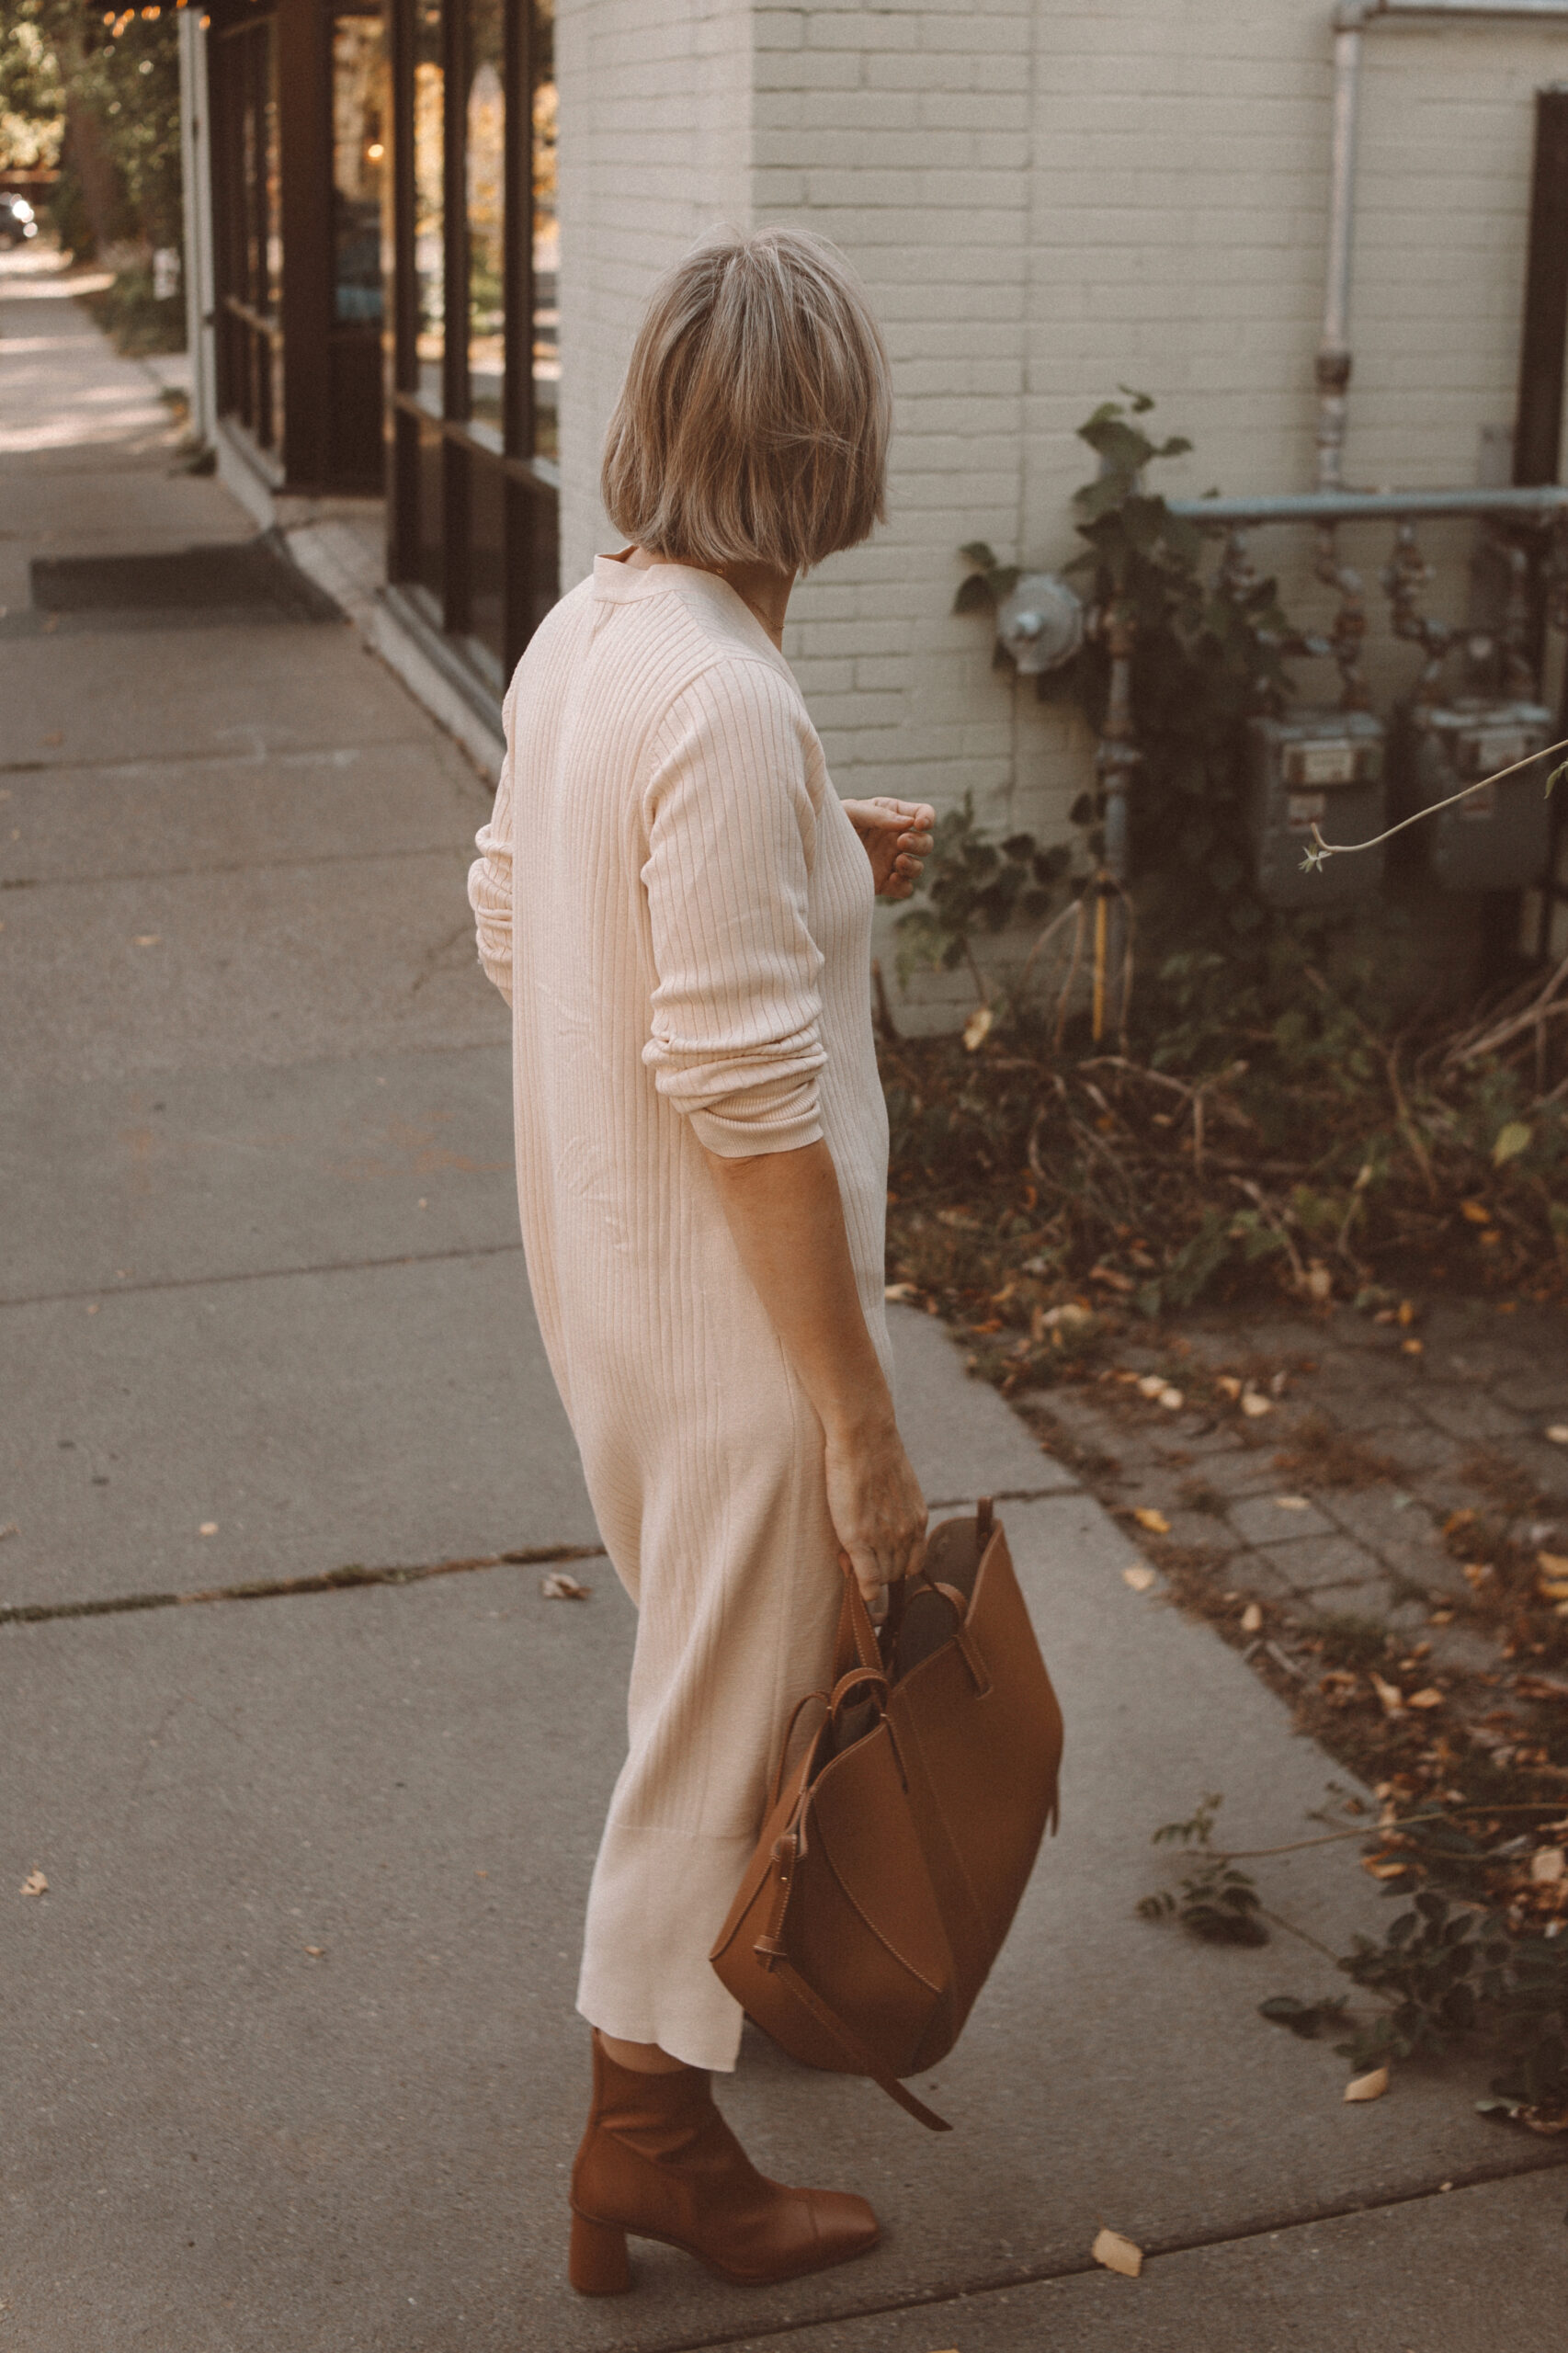 Karin Emily wears a soft sweater dress with Mguire heeled sock boots and a brown Polene Bag